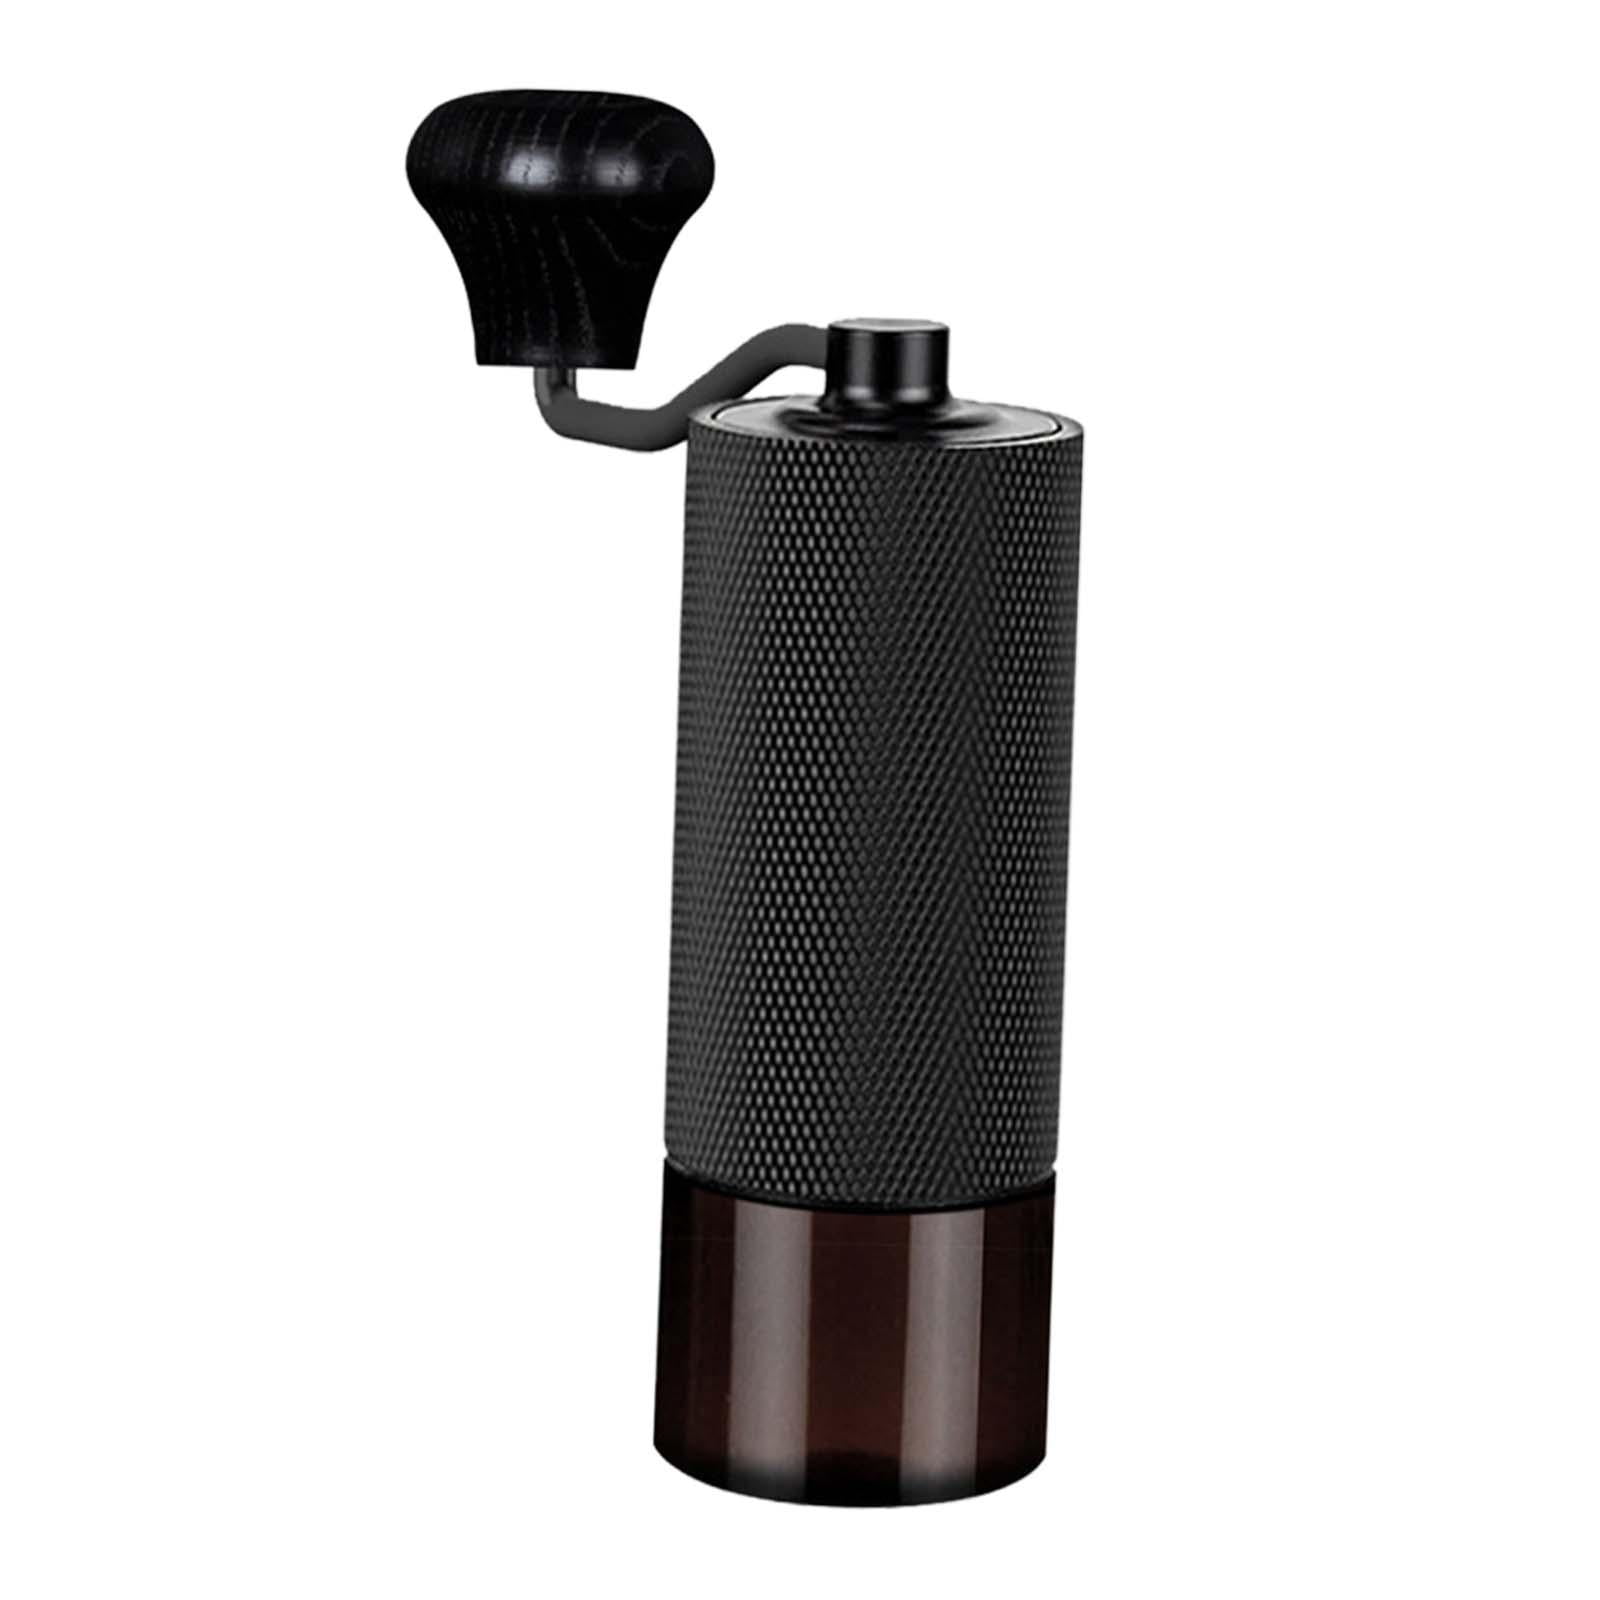 Manual Coffee Grinder - Hand Coffee Mill with Ceramic Burrs 6 External Adjustable Settings - Portable Hand Crank (Straight)